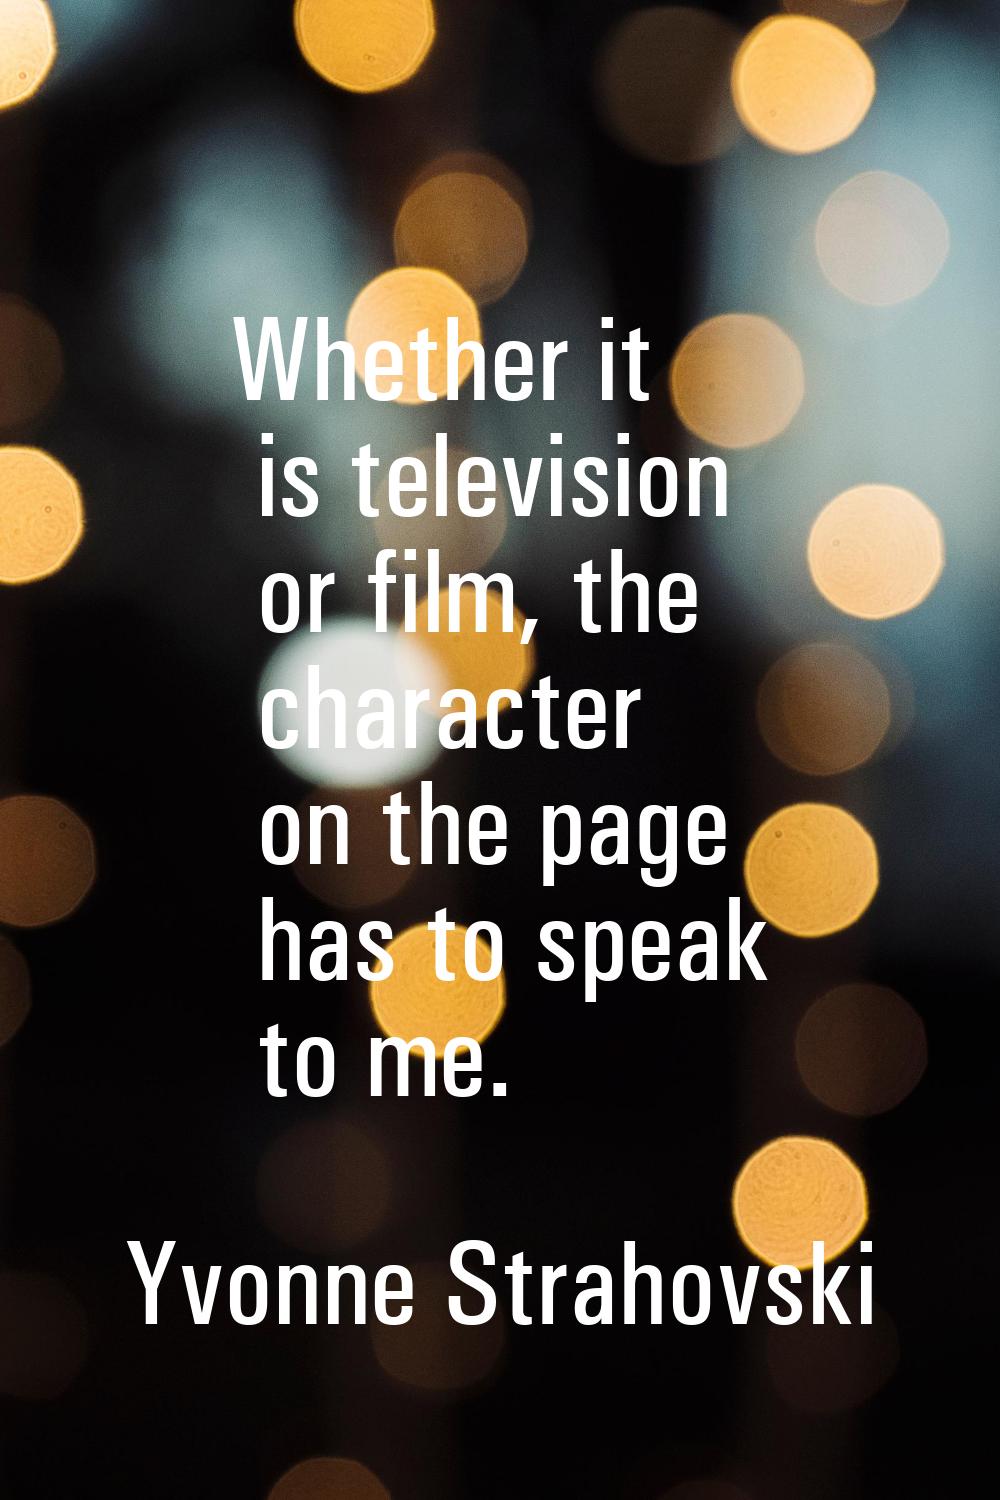 Whether it is television or film, the character on the page has to speak to me.